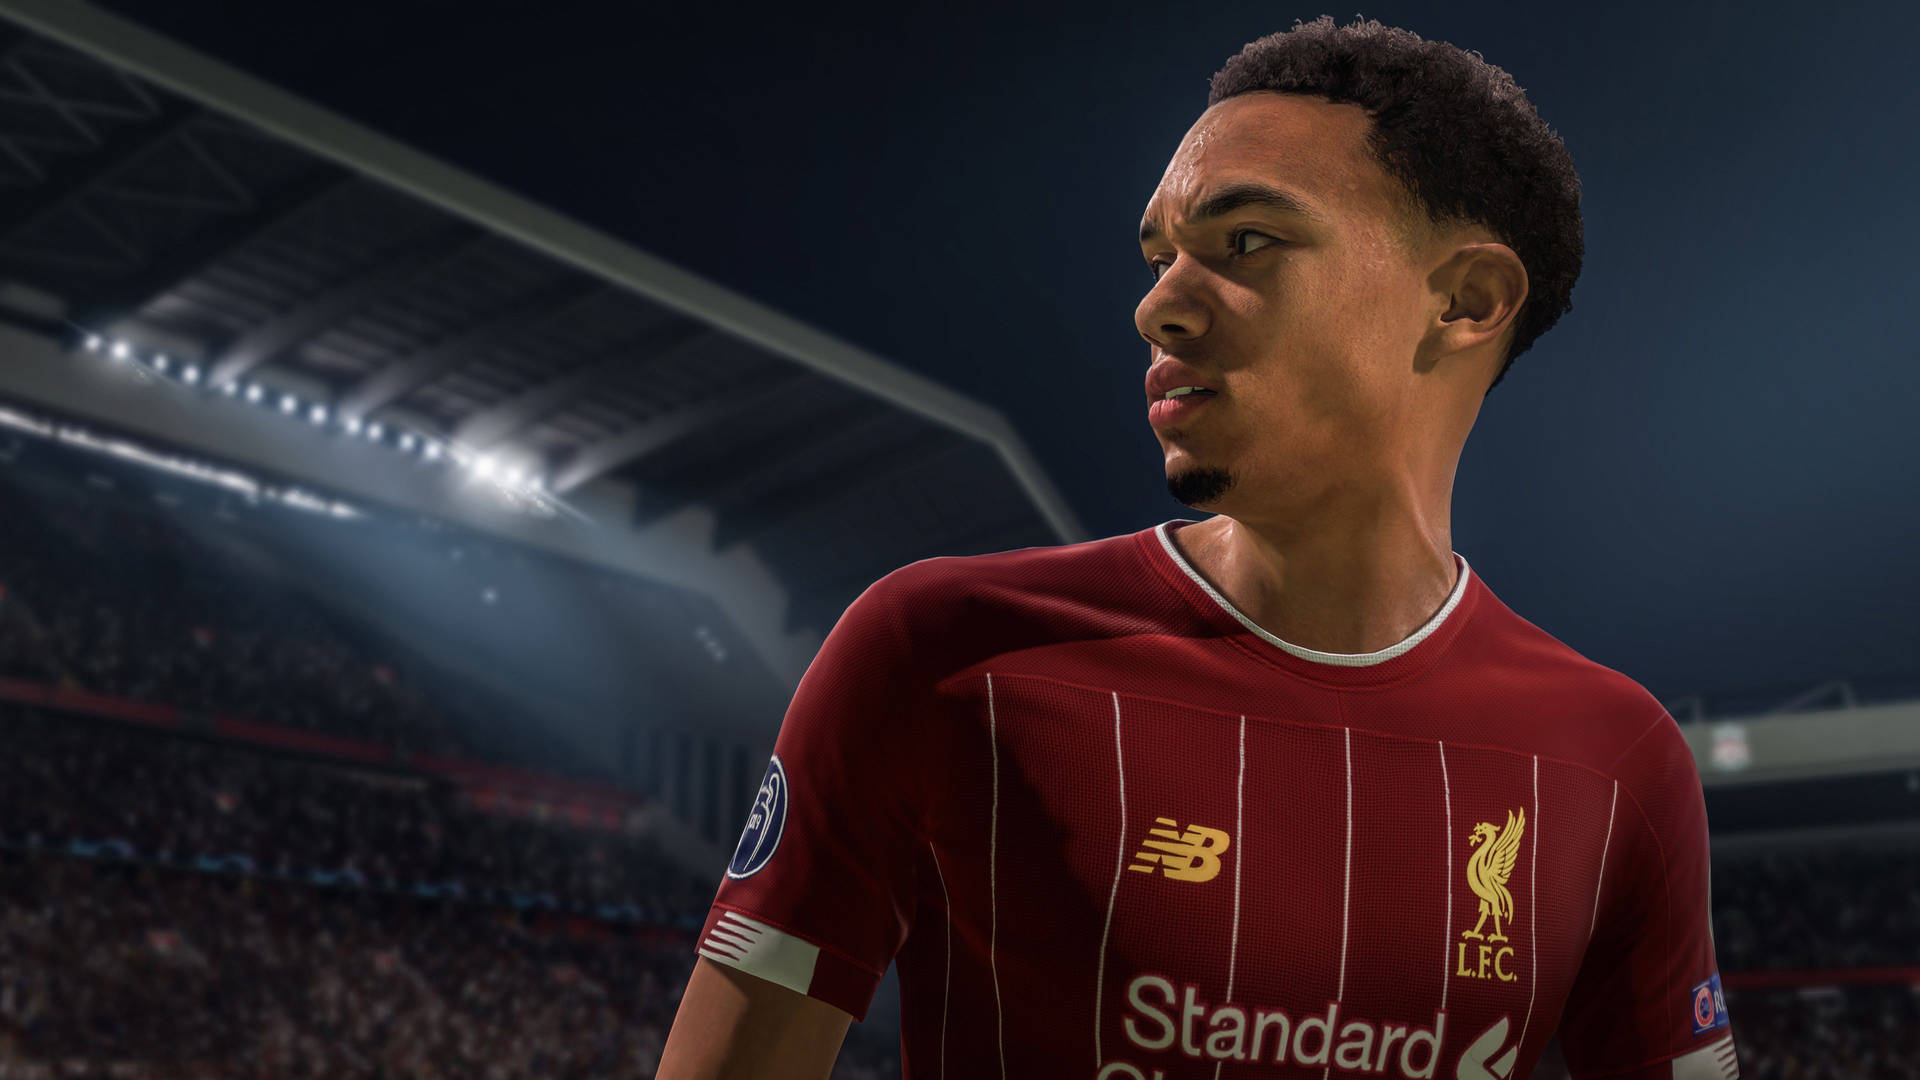 Fifa 21 Ea Sports Character Trent Alexander-arnold Background